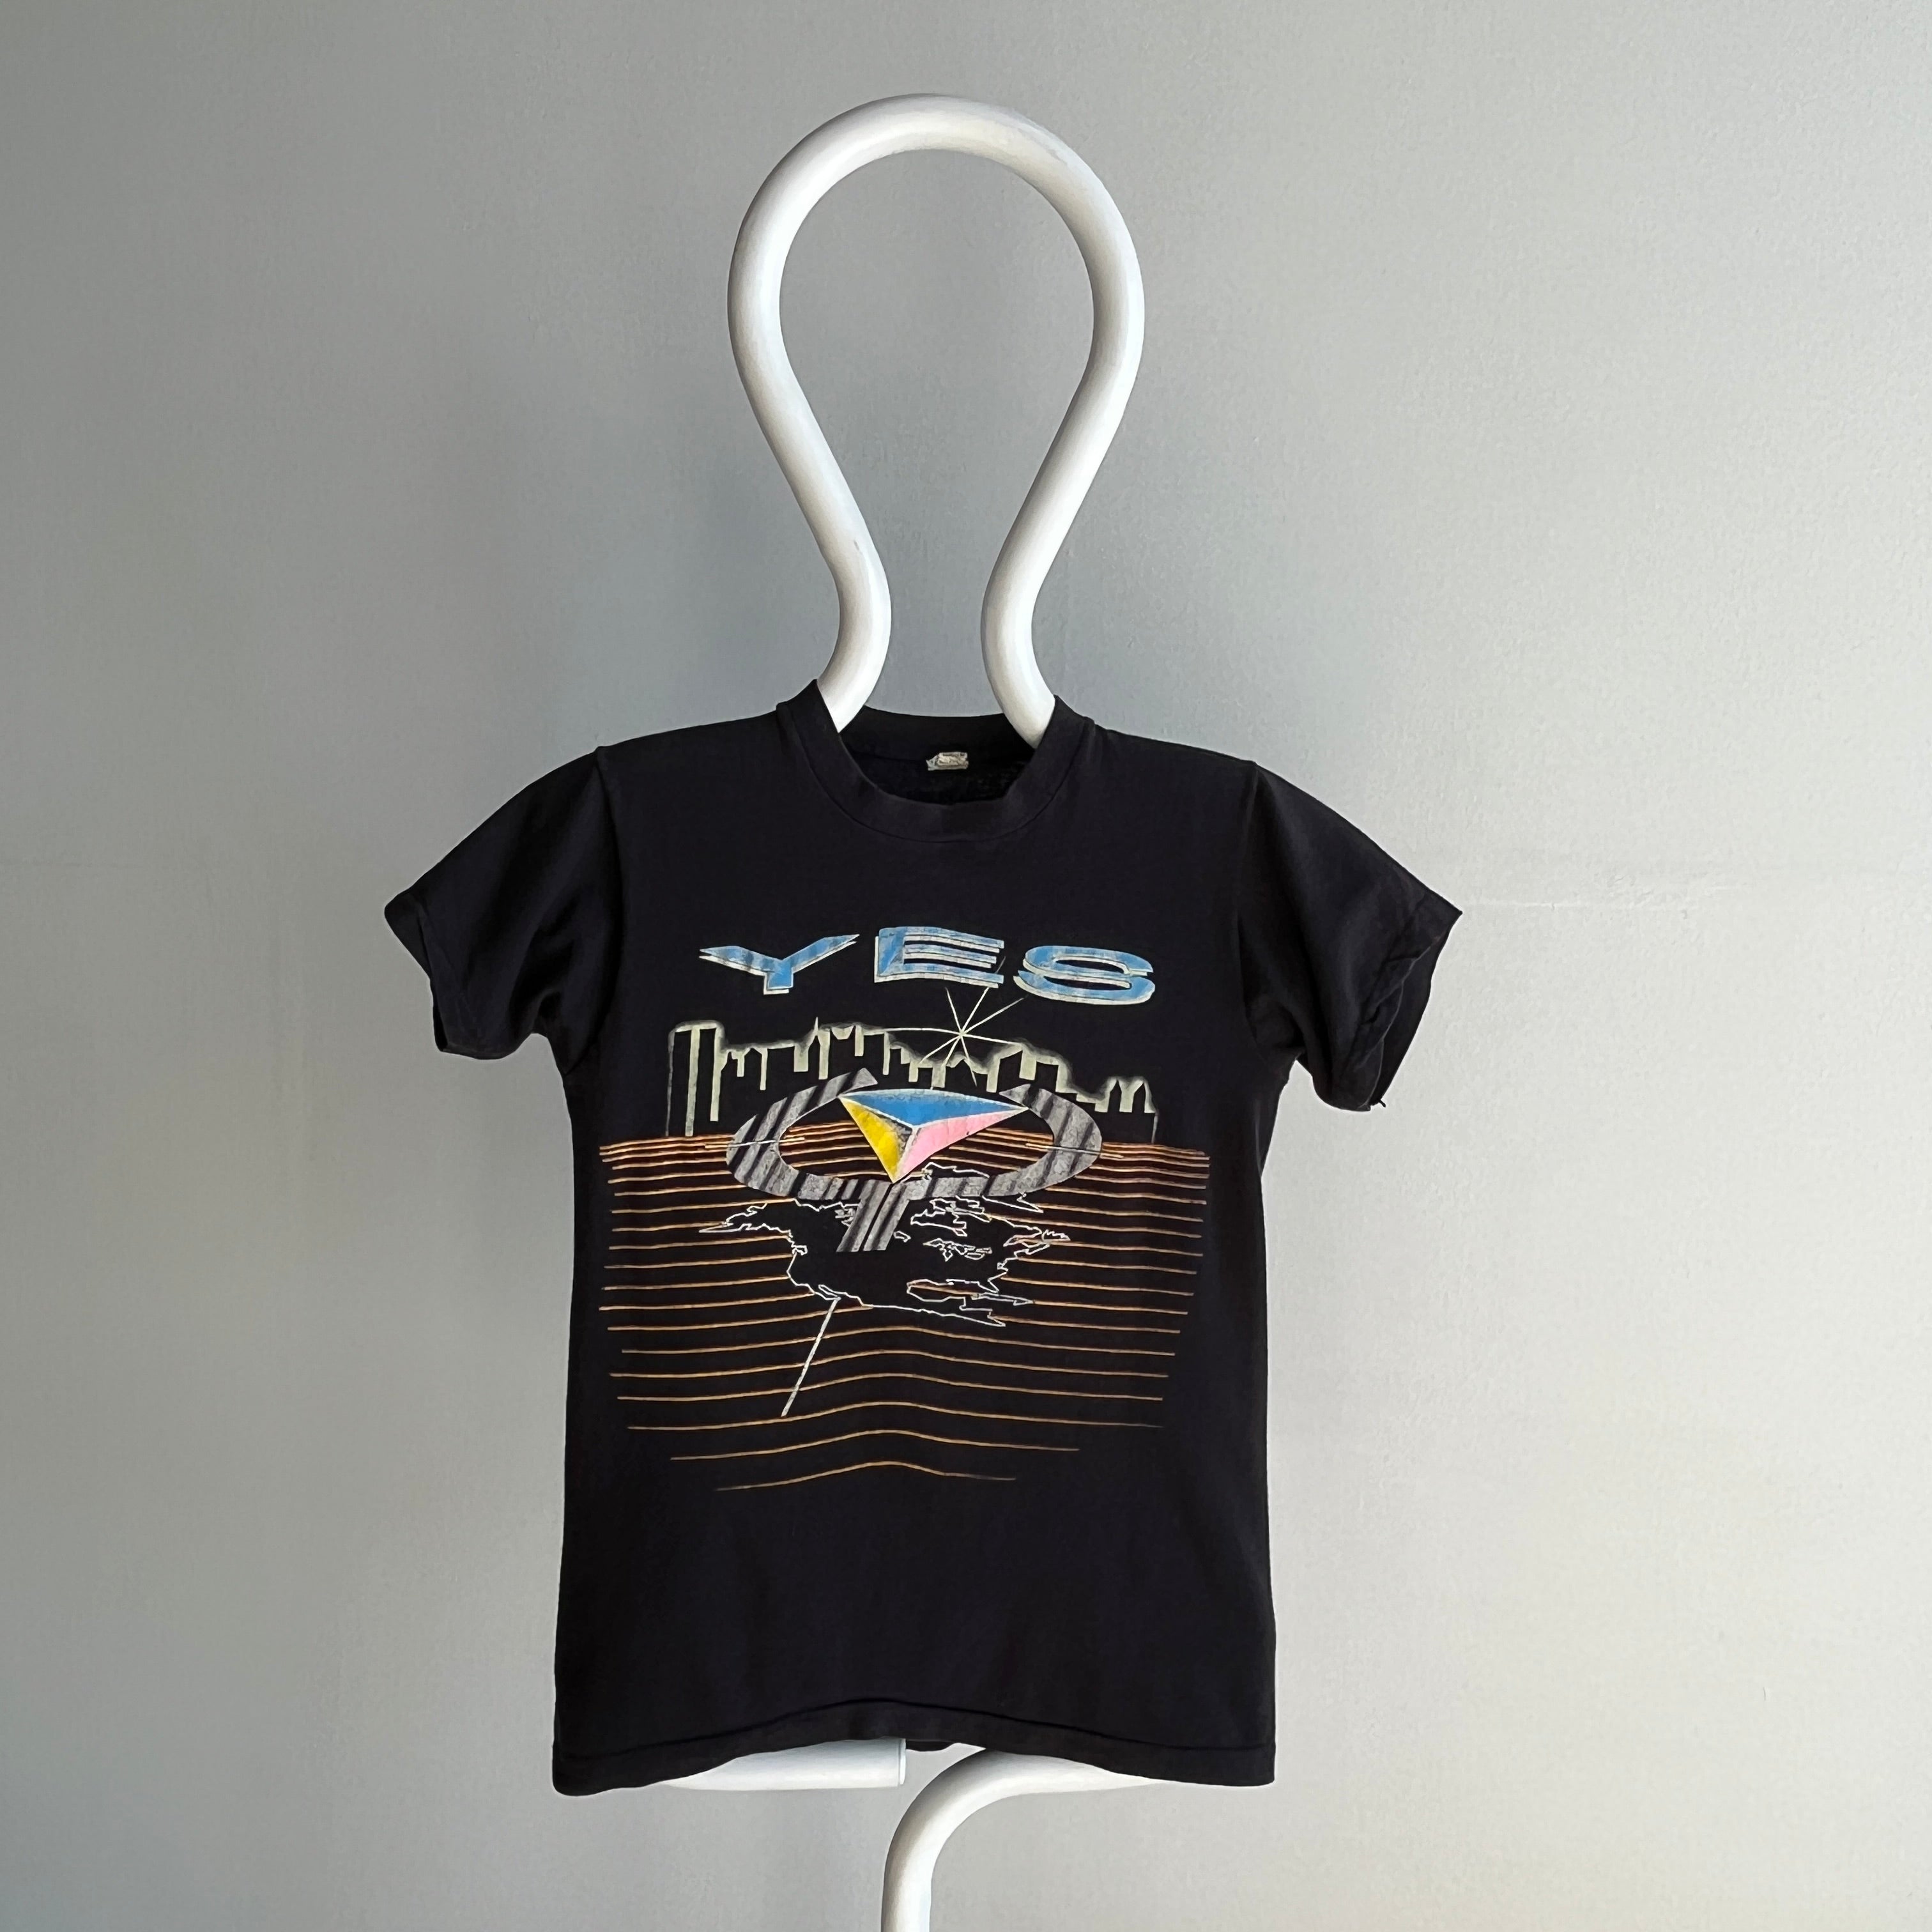 1989 Stevie Ray Vaughan Tour T-Shirt on a Sportswear Tag